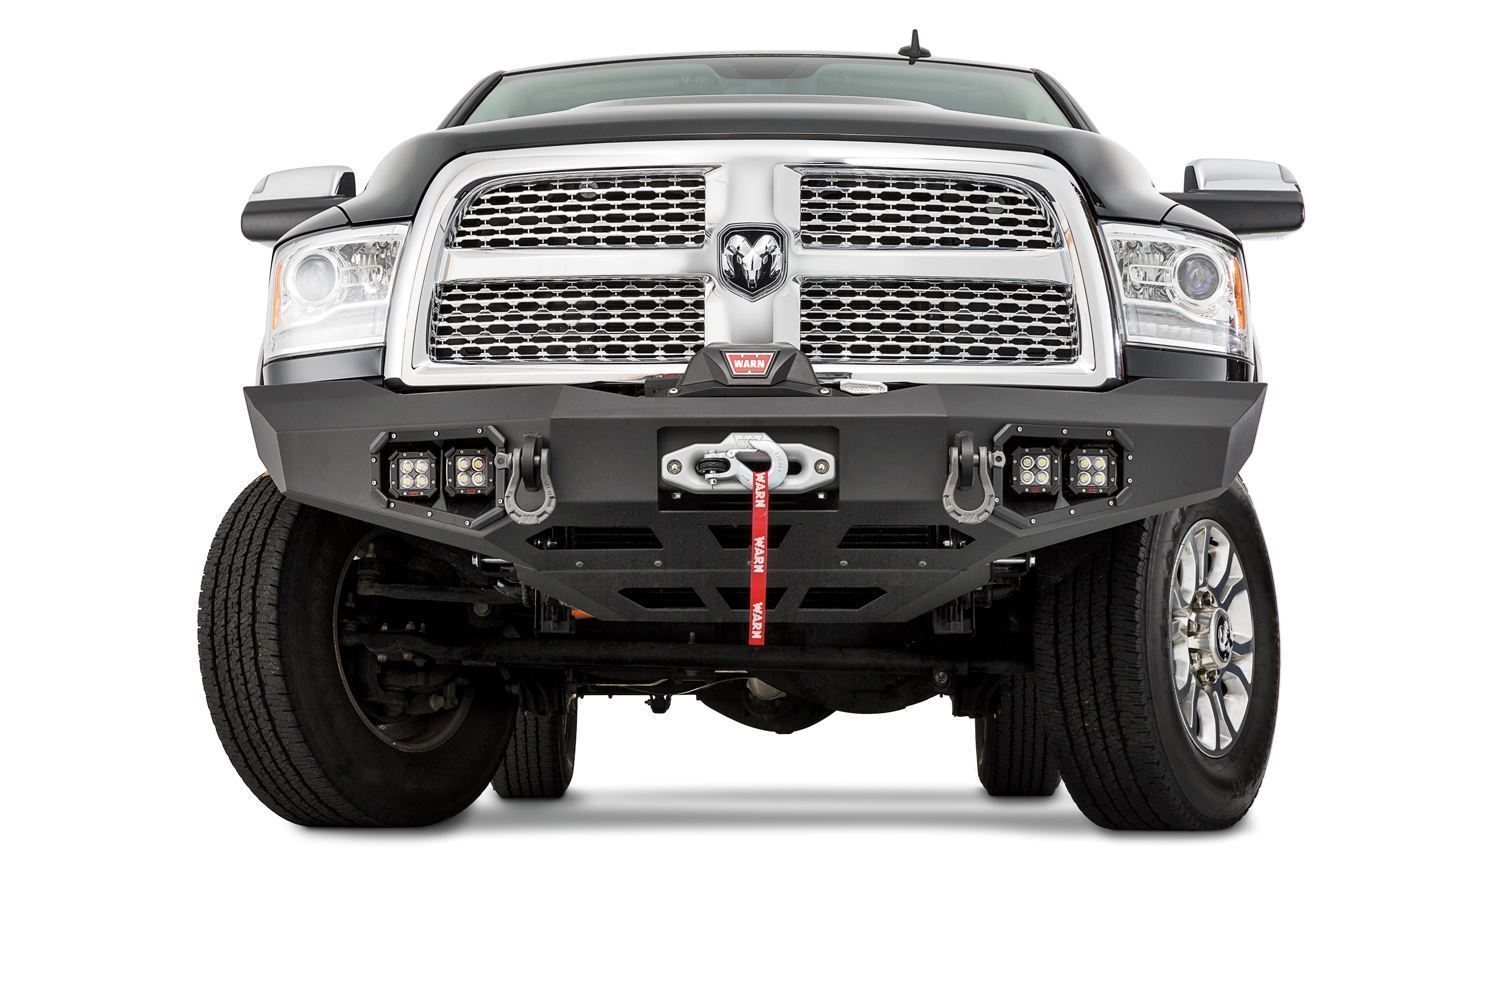 '11-19 Ram 2500/3500 Warn Ascent Front Bumper Warn Industries (front view)